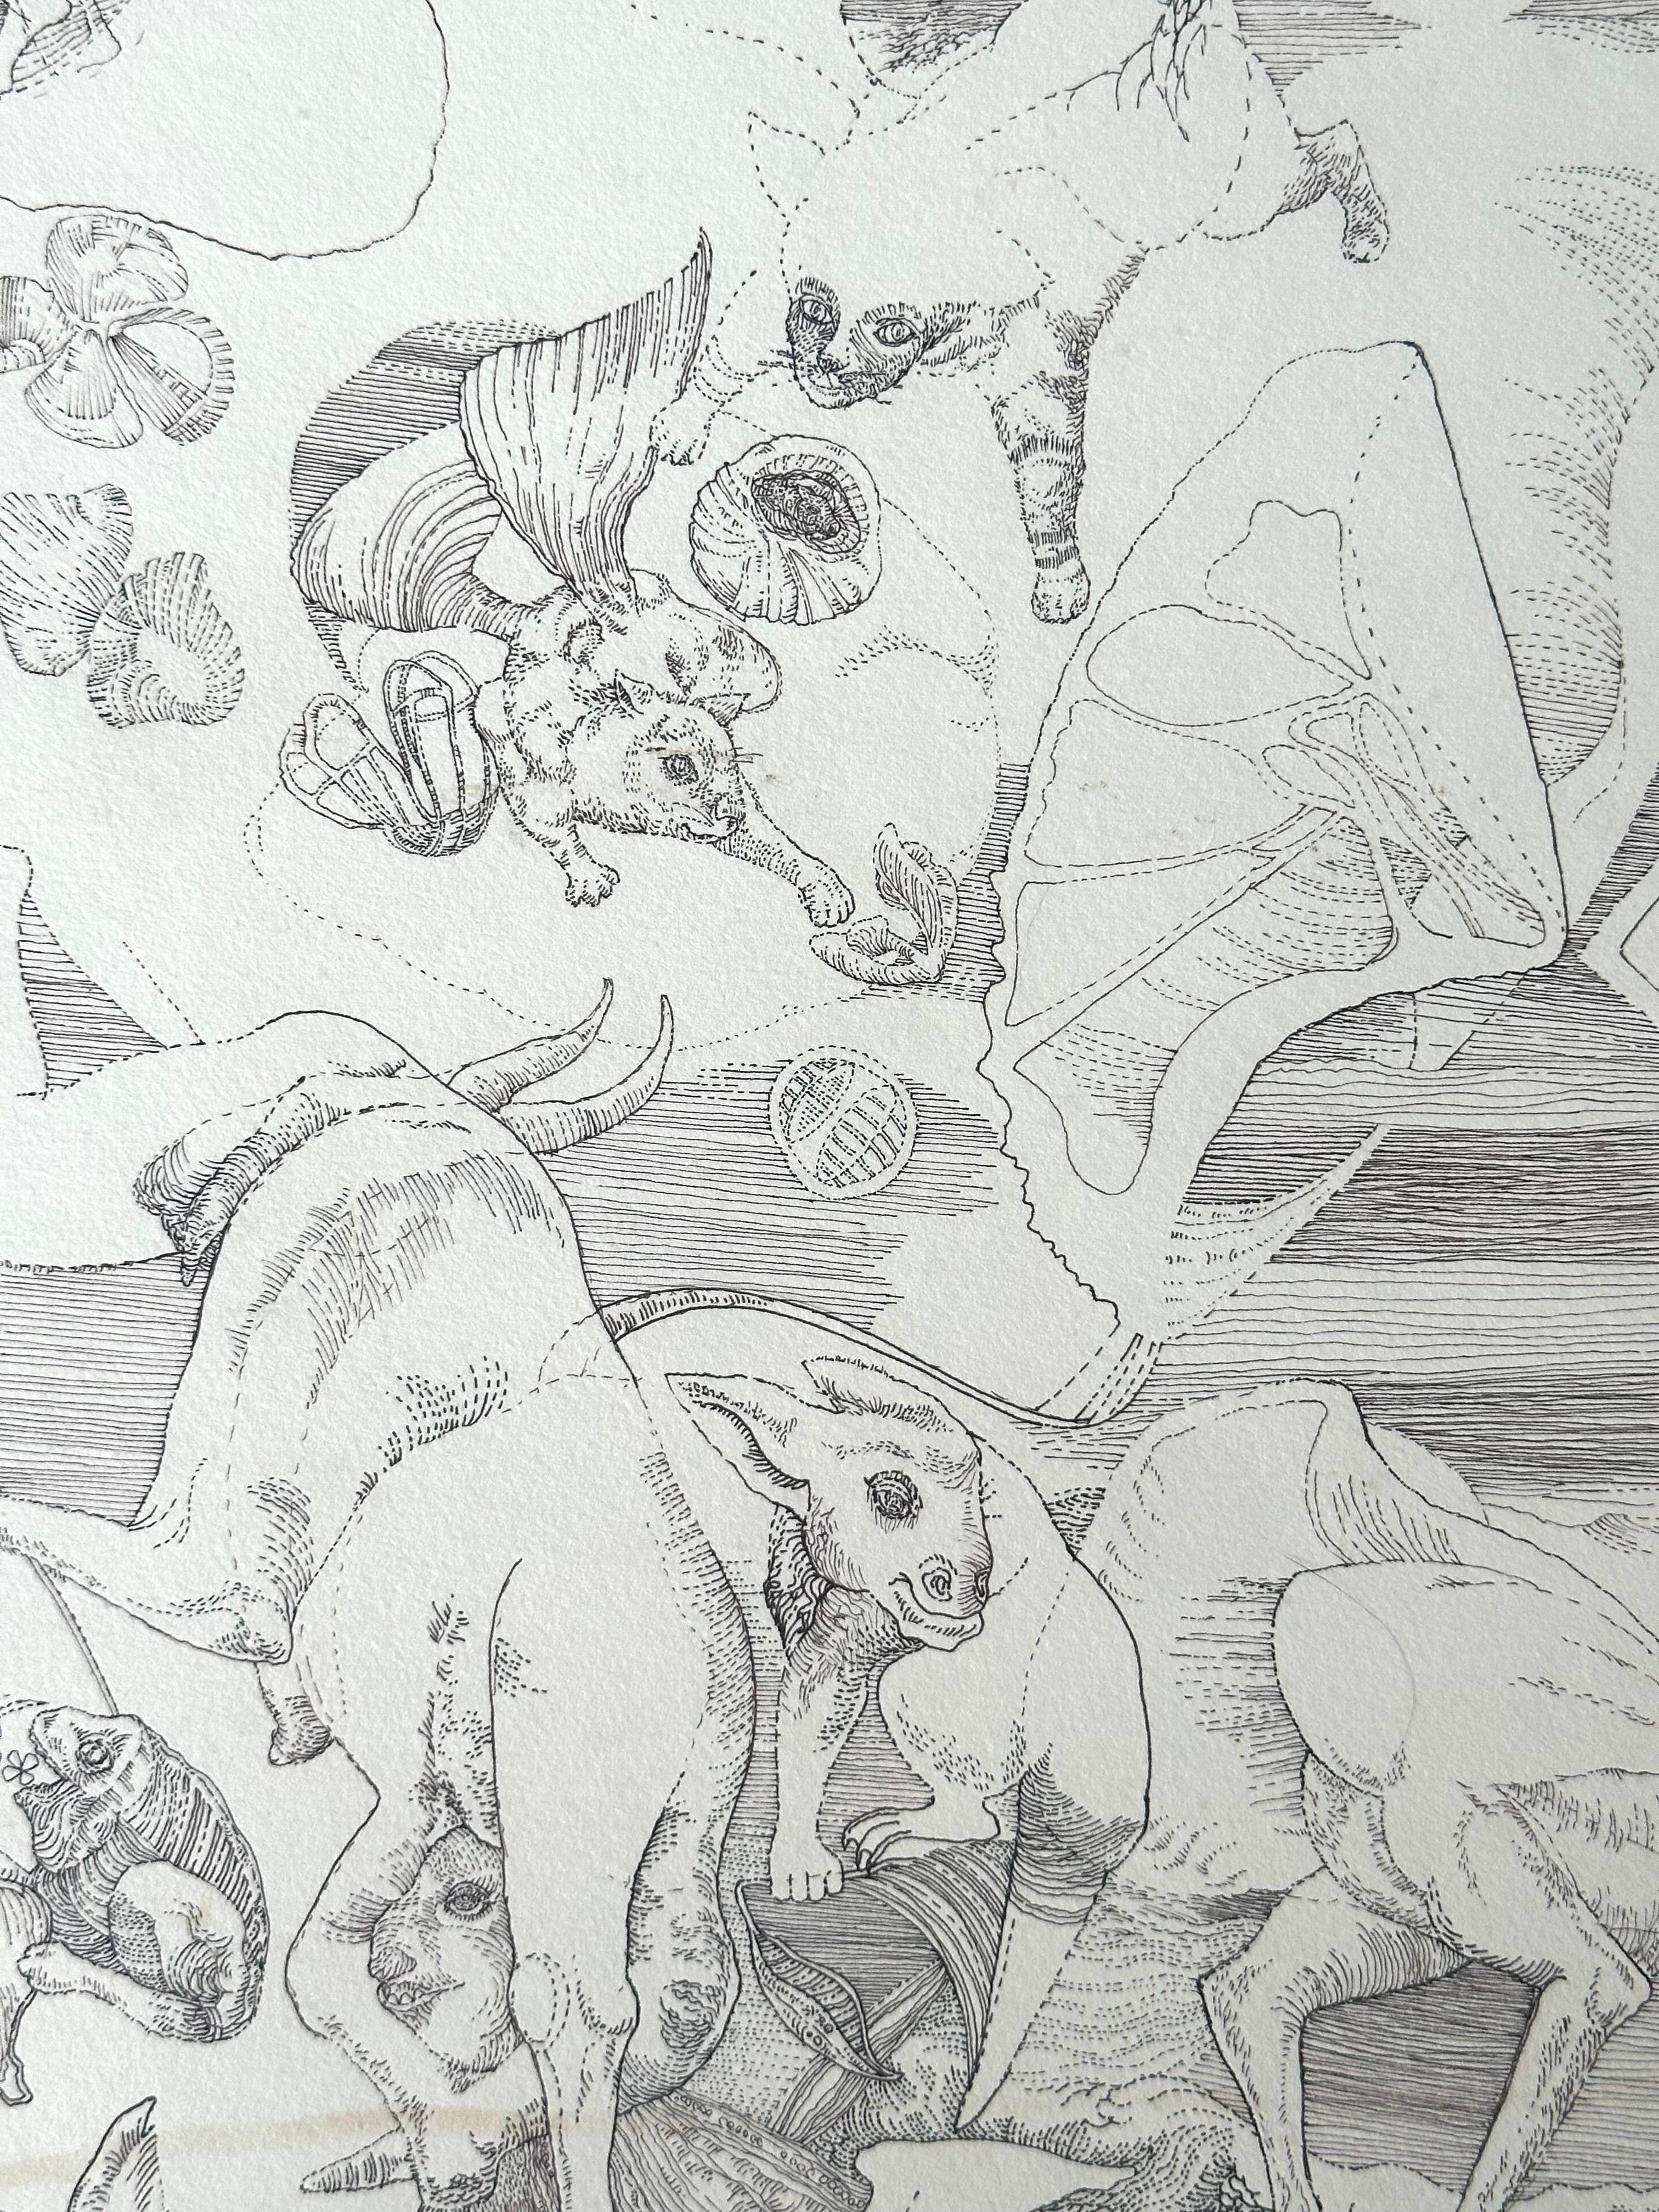 Surrealist proto-Afropunk drawing by African-American artist, Roland Ayers (1932-2014). 

Animal Capers, ca. 1970 . 

Ink on illustration board, image measures 20 inches. inches; illustration panel measures 21.5 inches. Unsigned. 

Minor staining